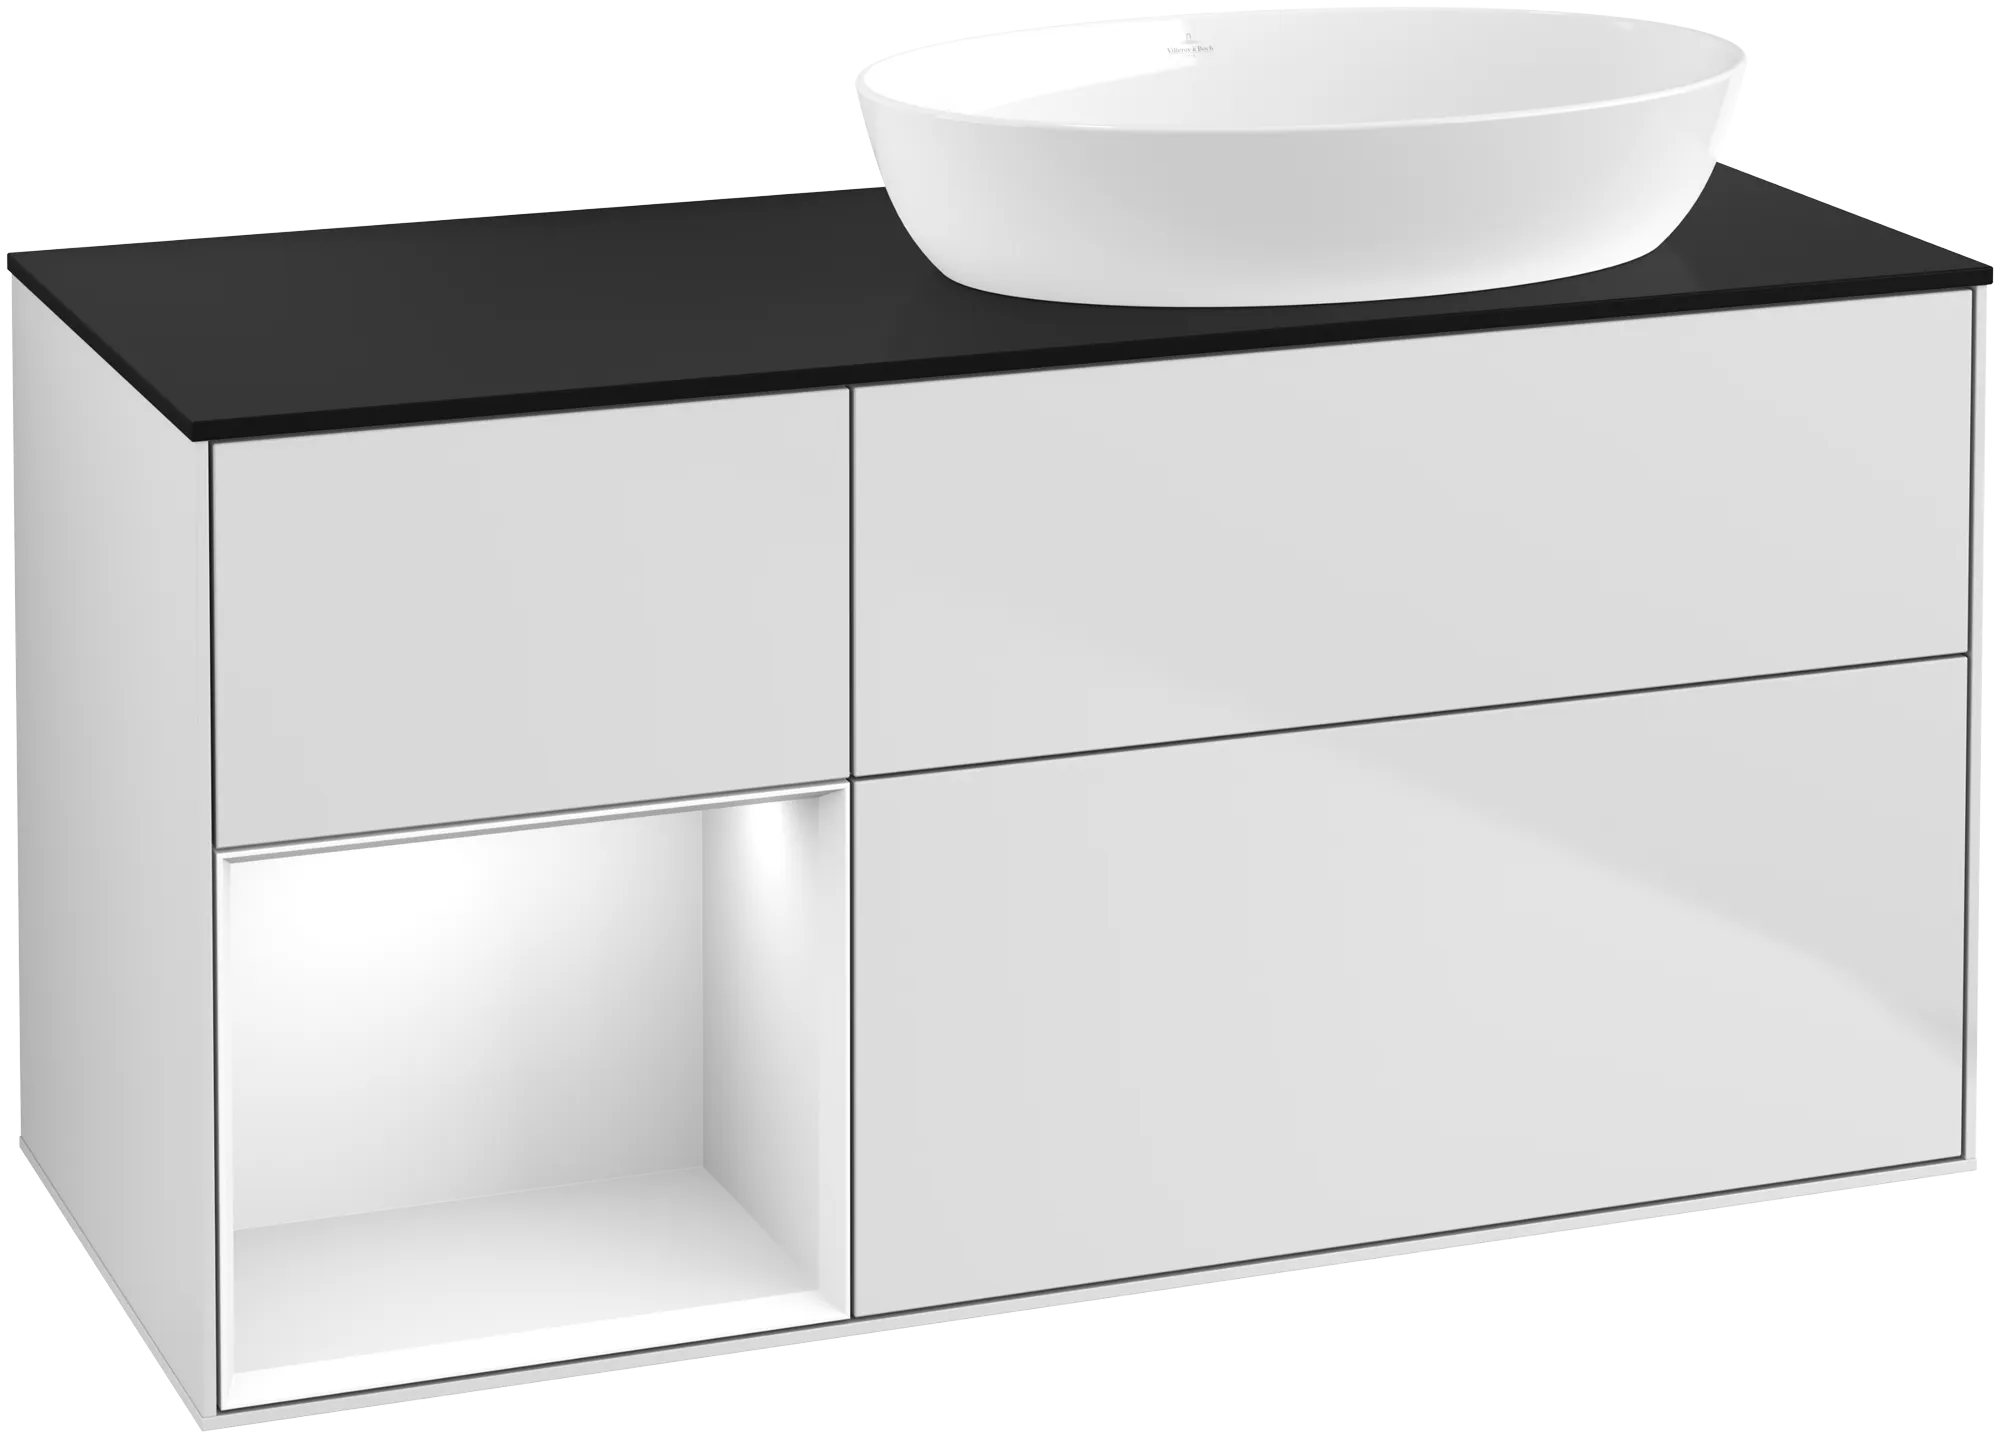 Picture of VILLEROY BOCH Finion Vanity unit, with lighting, 3 pull-out compartments, 1200 x 603 x 501 mm, White Matt Lacquer / Glossy White Lacquer / Glass Black Matt #GA42GFMT